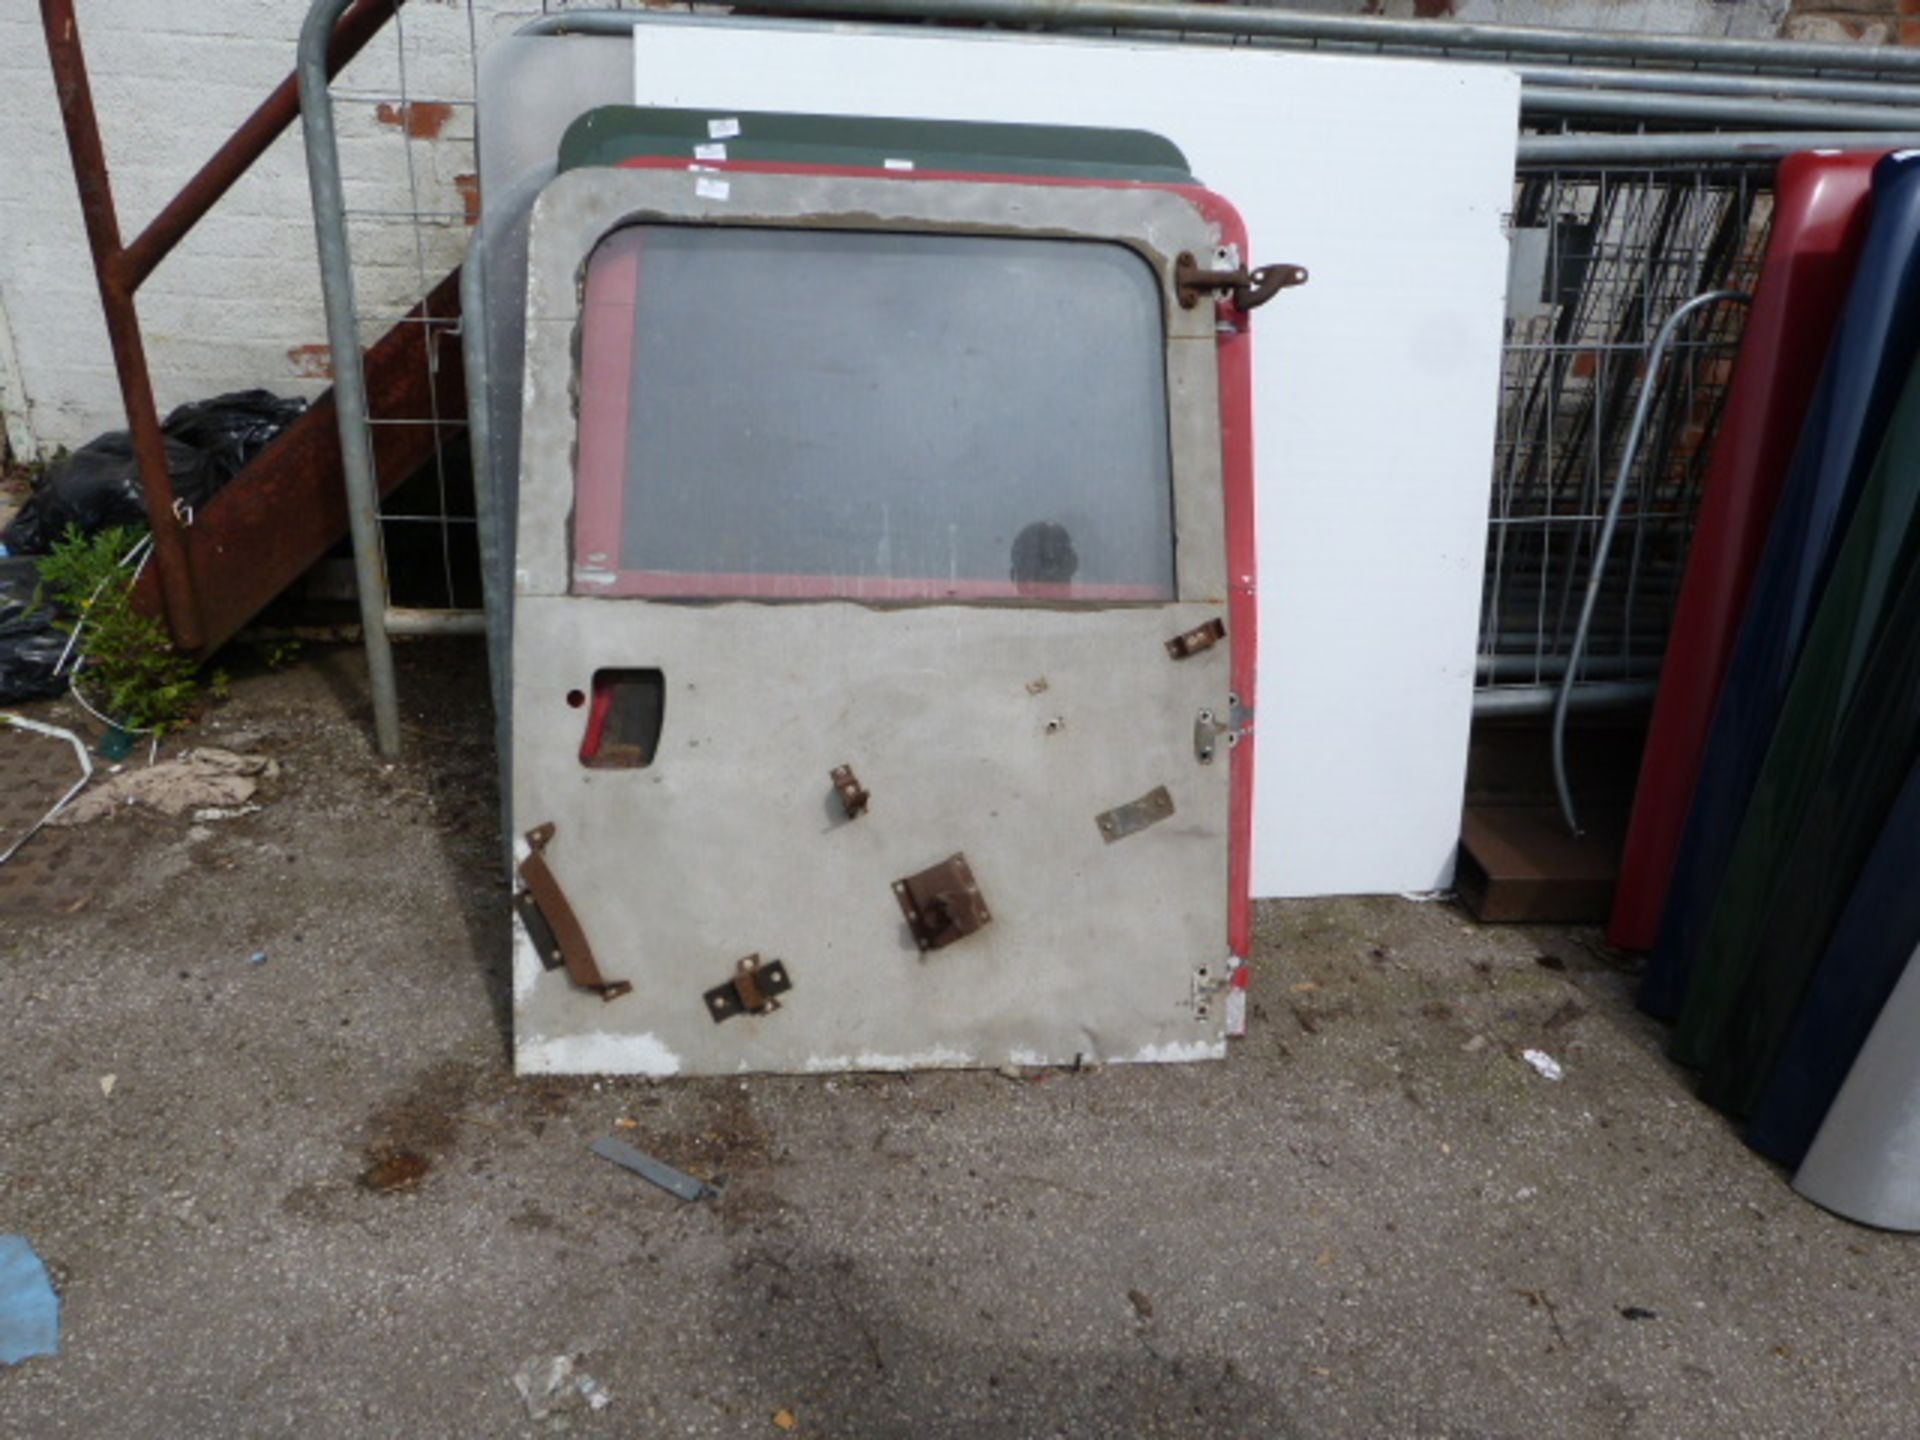 Land Rover Rear Door with Shovel and Accessory Brackets